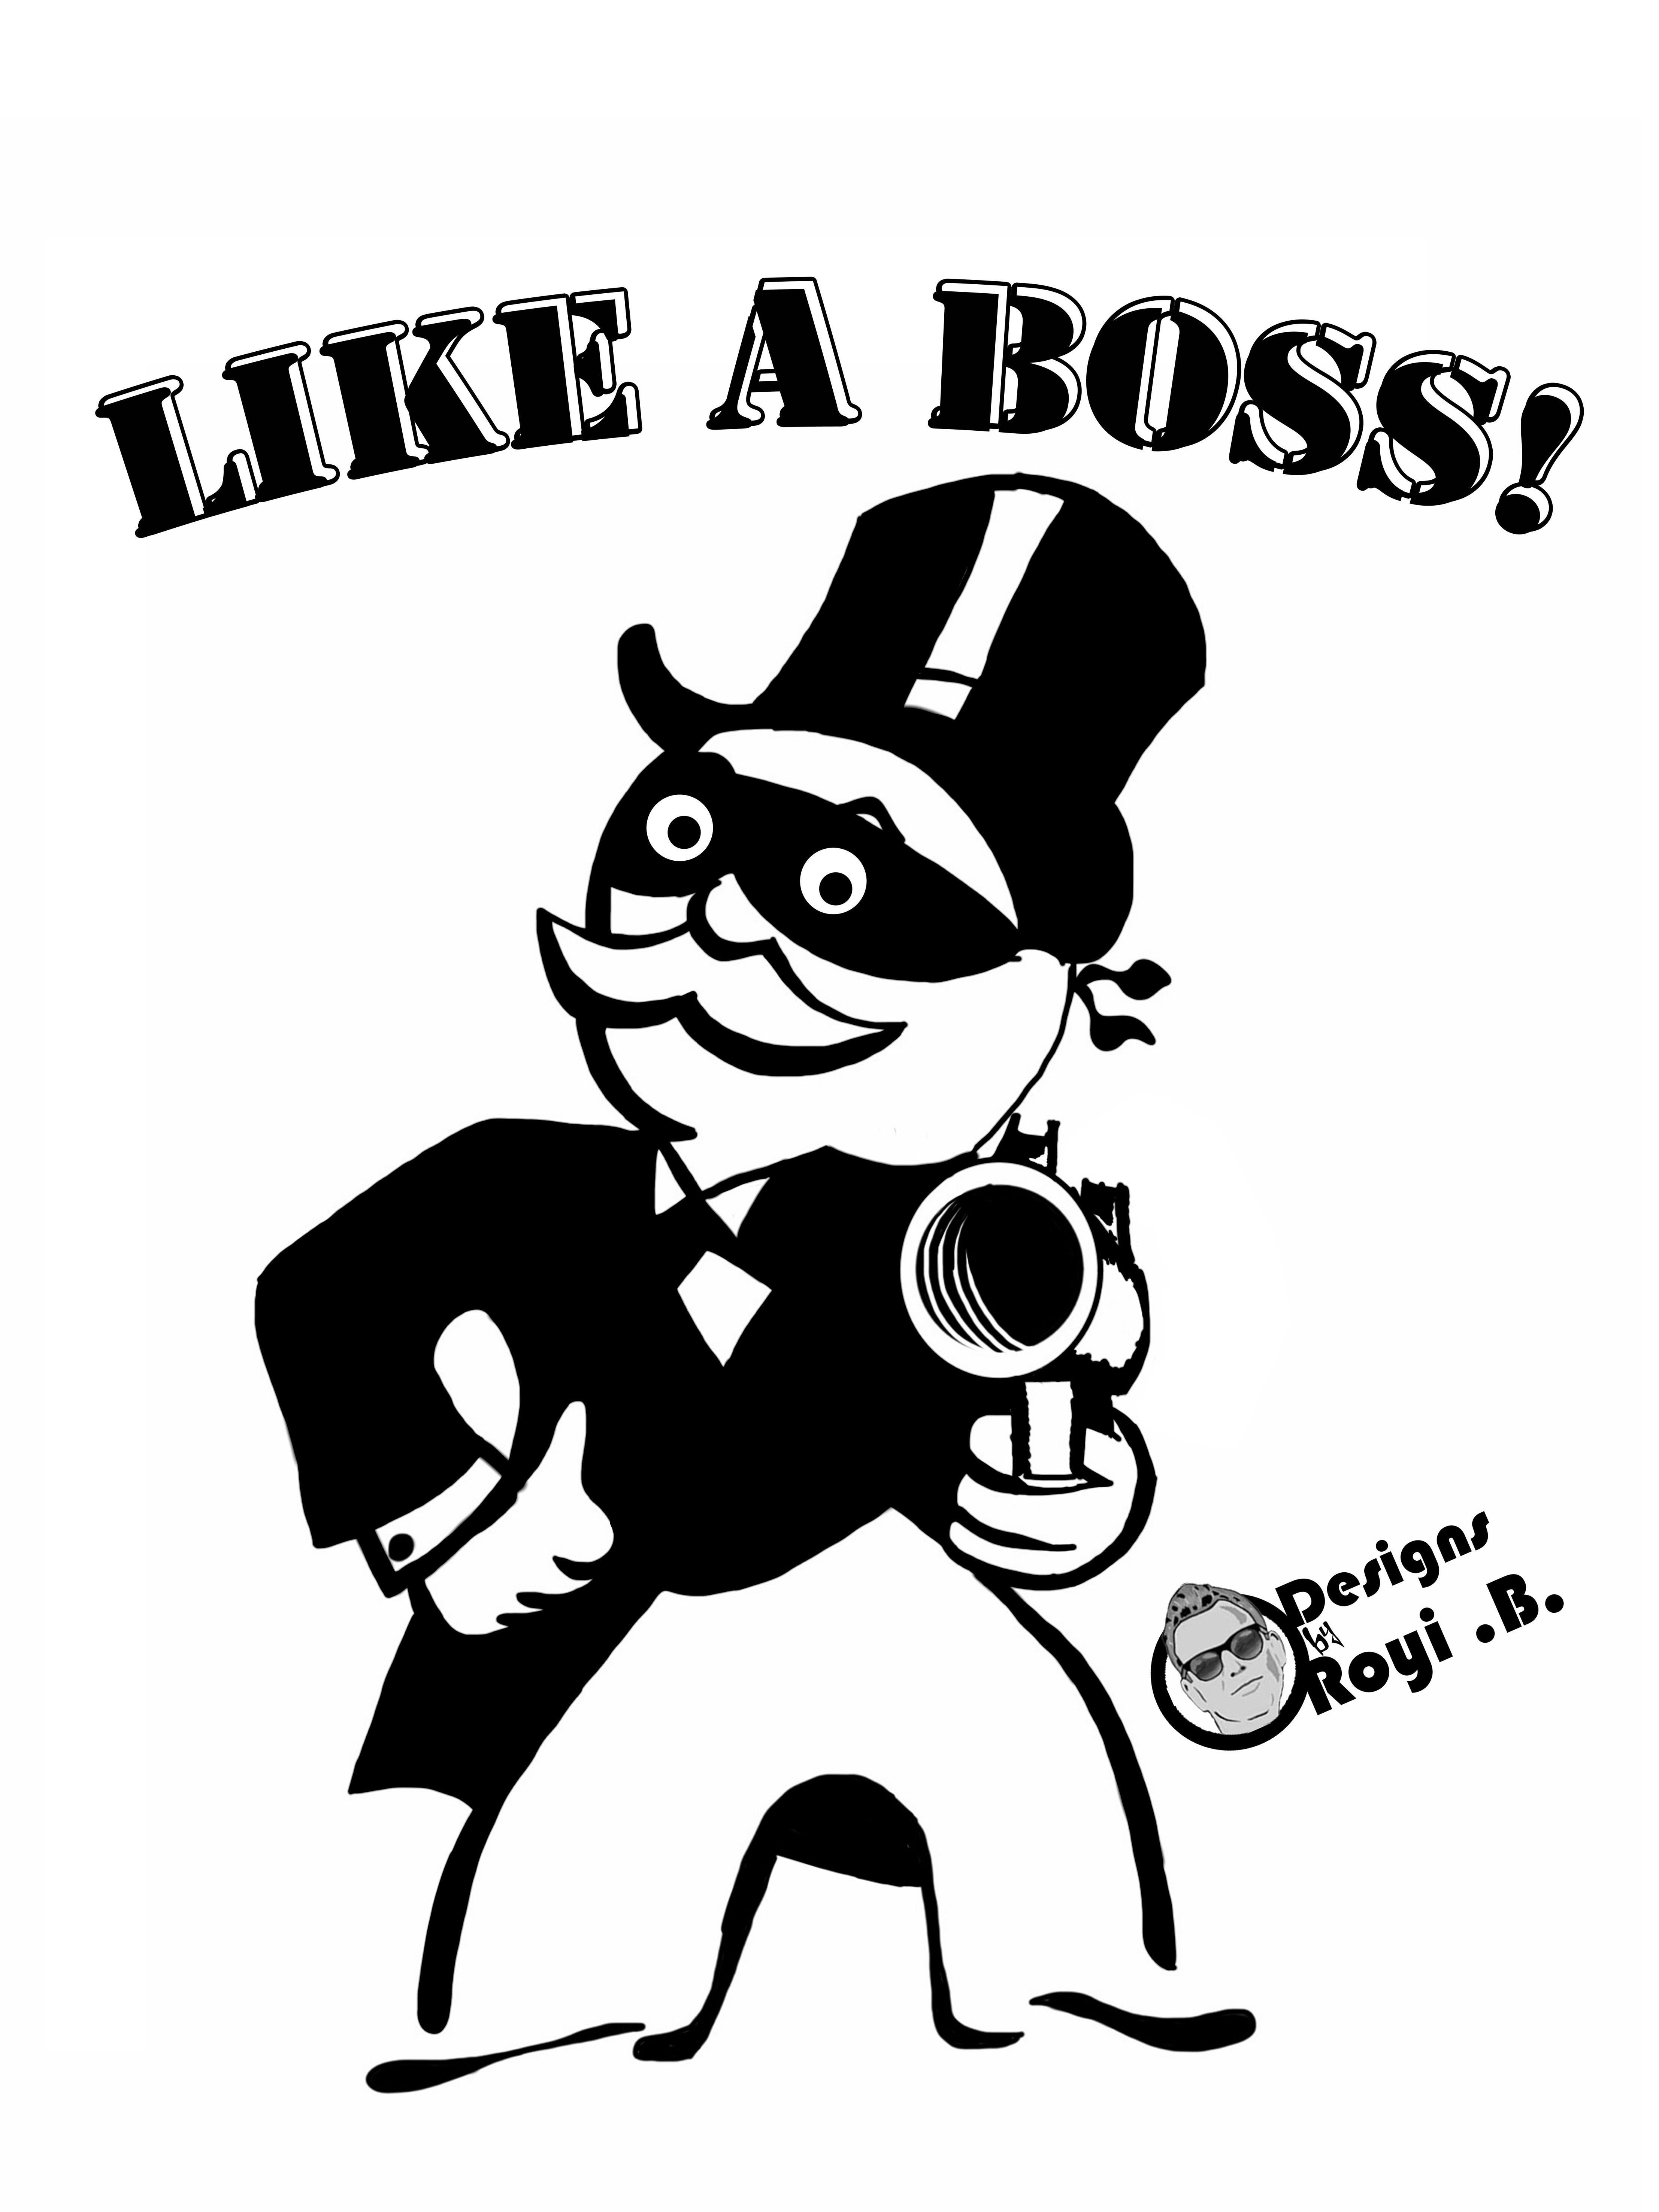 Make Money With Monopoly Guy. Drawing Cartoon Faces, Monopoly Man, Graffiti Lettering